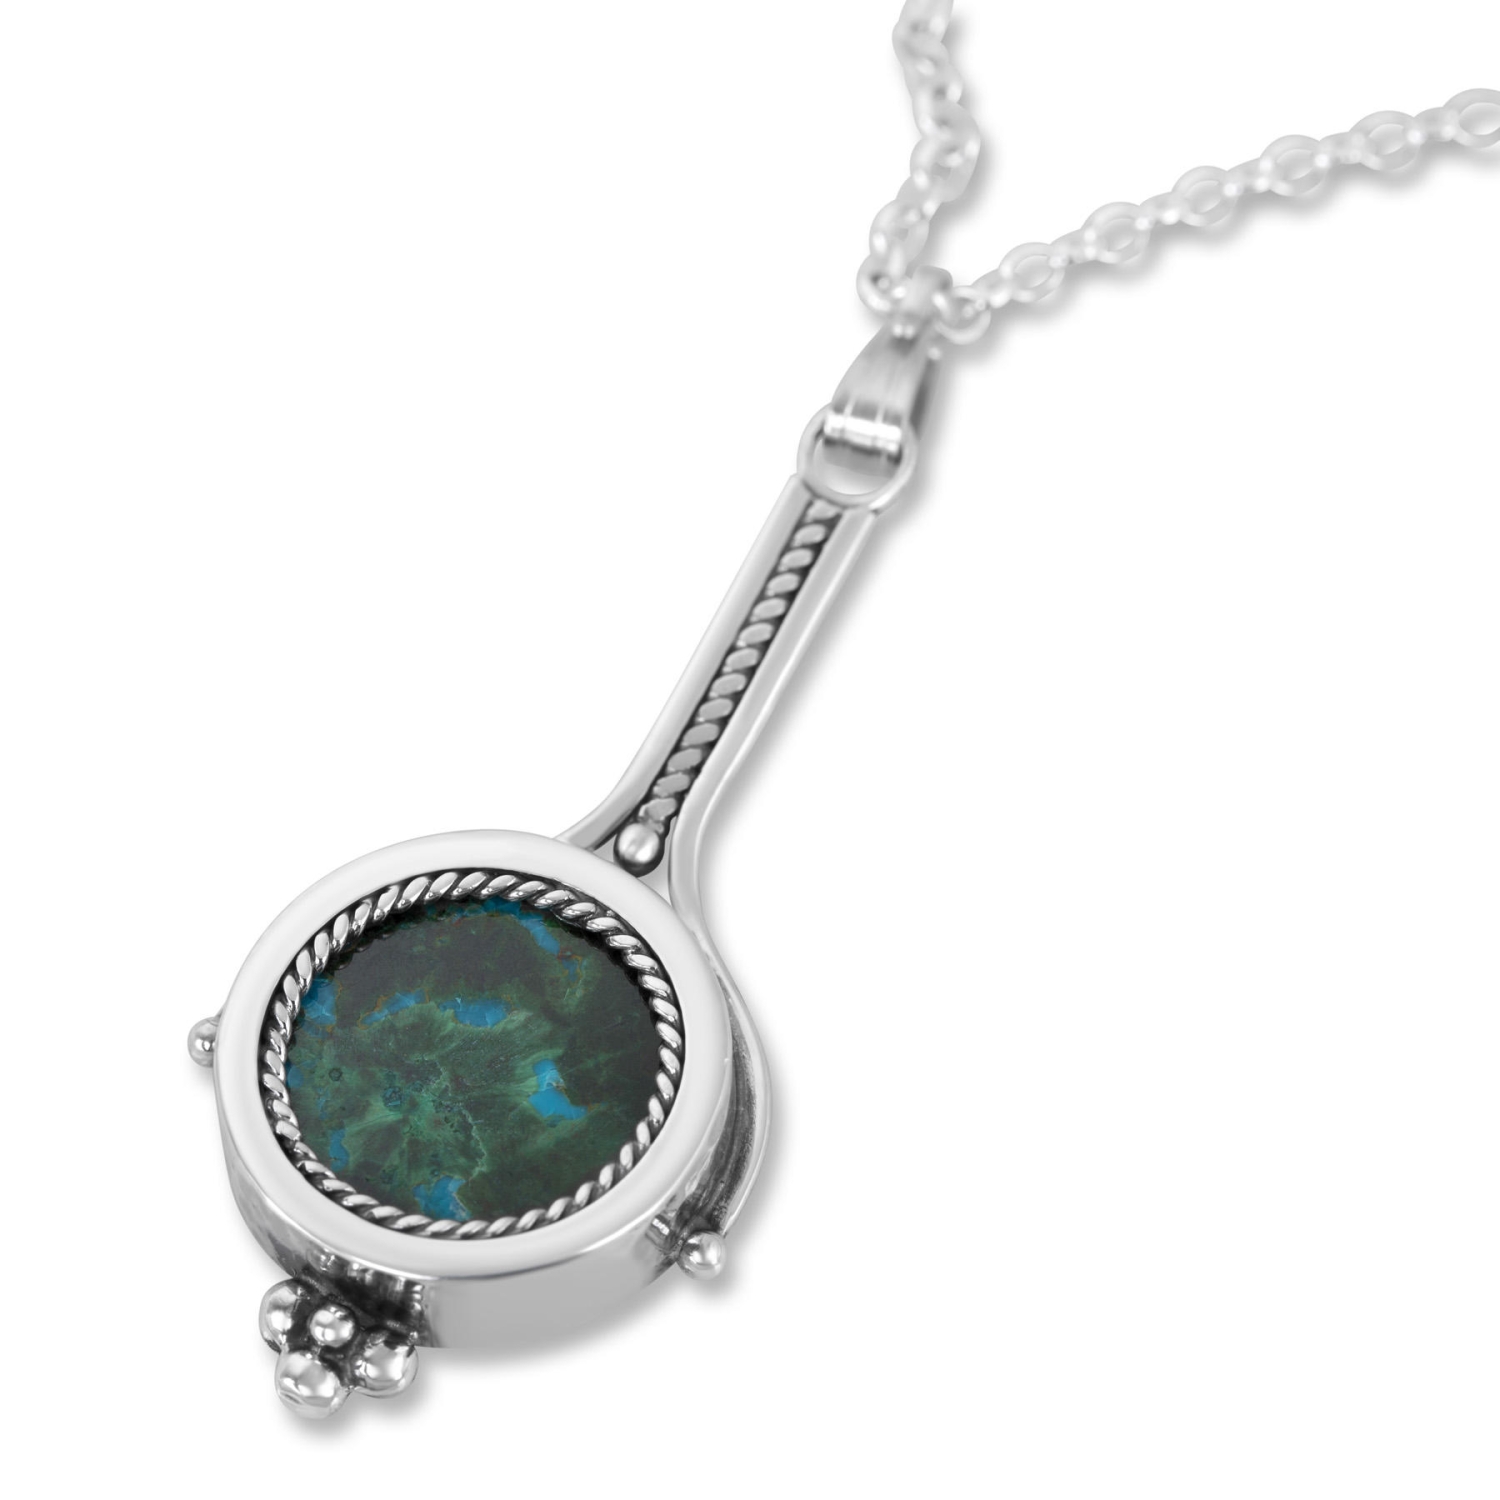 Long Sterling Silver and Eilat Stone Necklace - 1